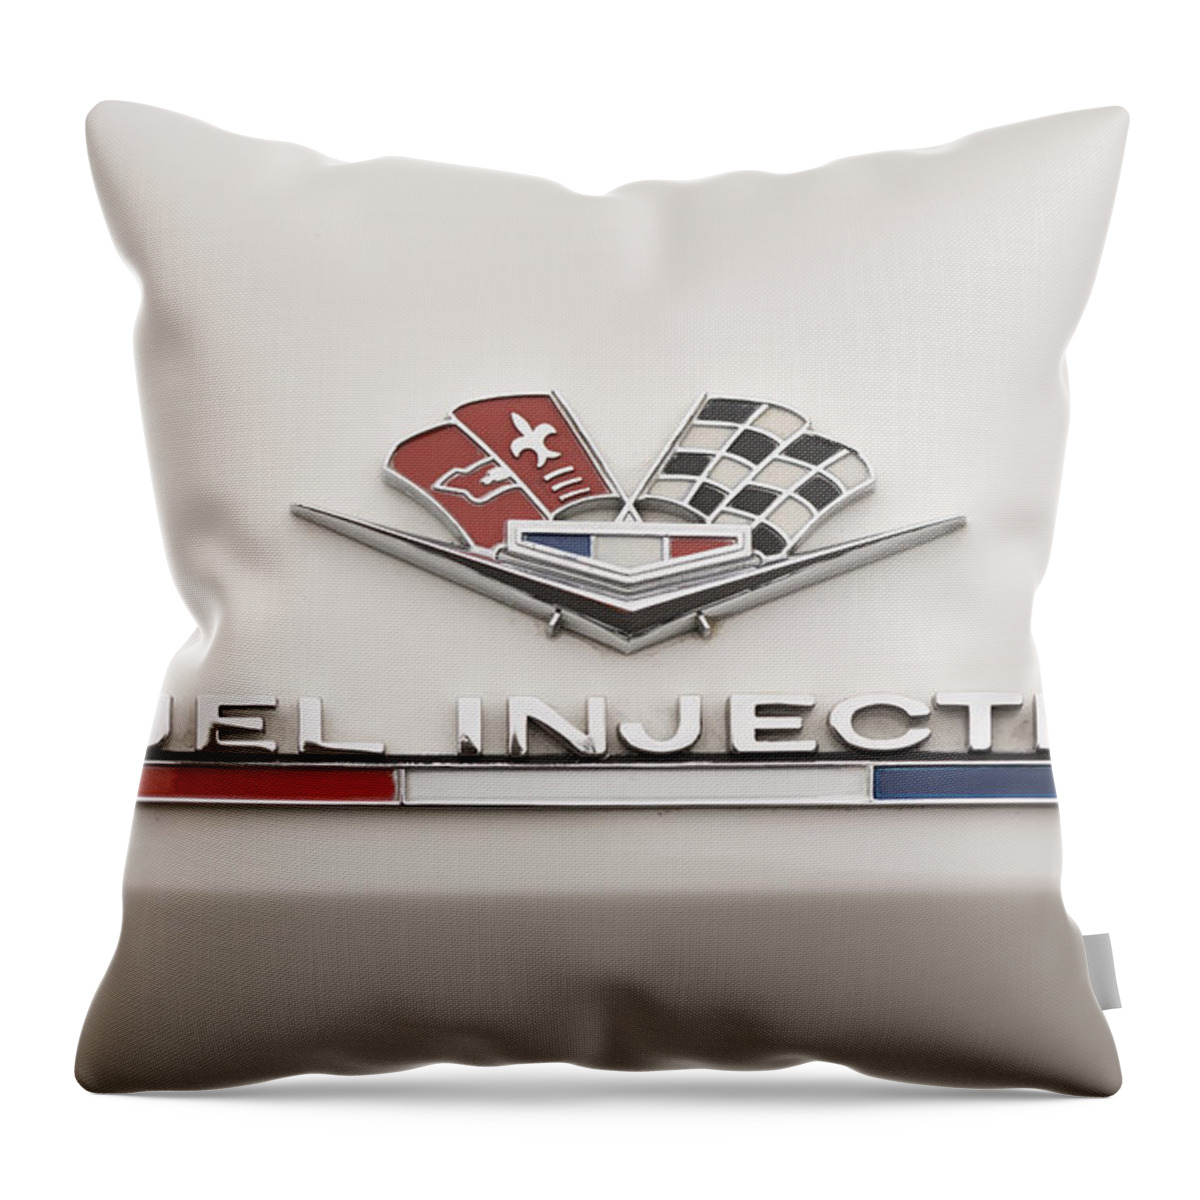 Corvette Throw Pillow featuring the photograph Corvette Fuel Injection by Scott Campbell